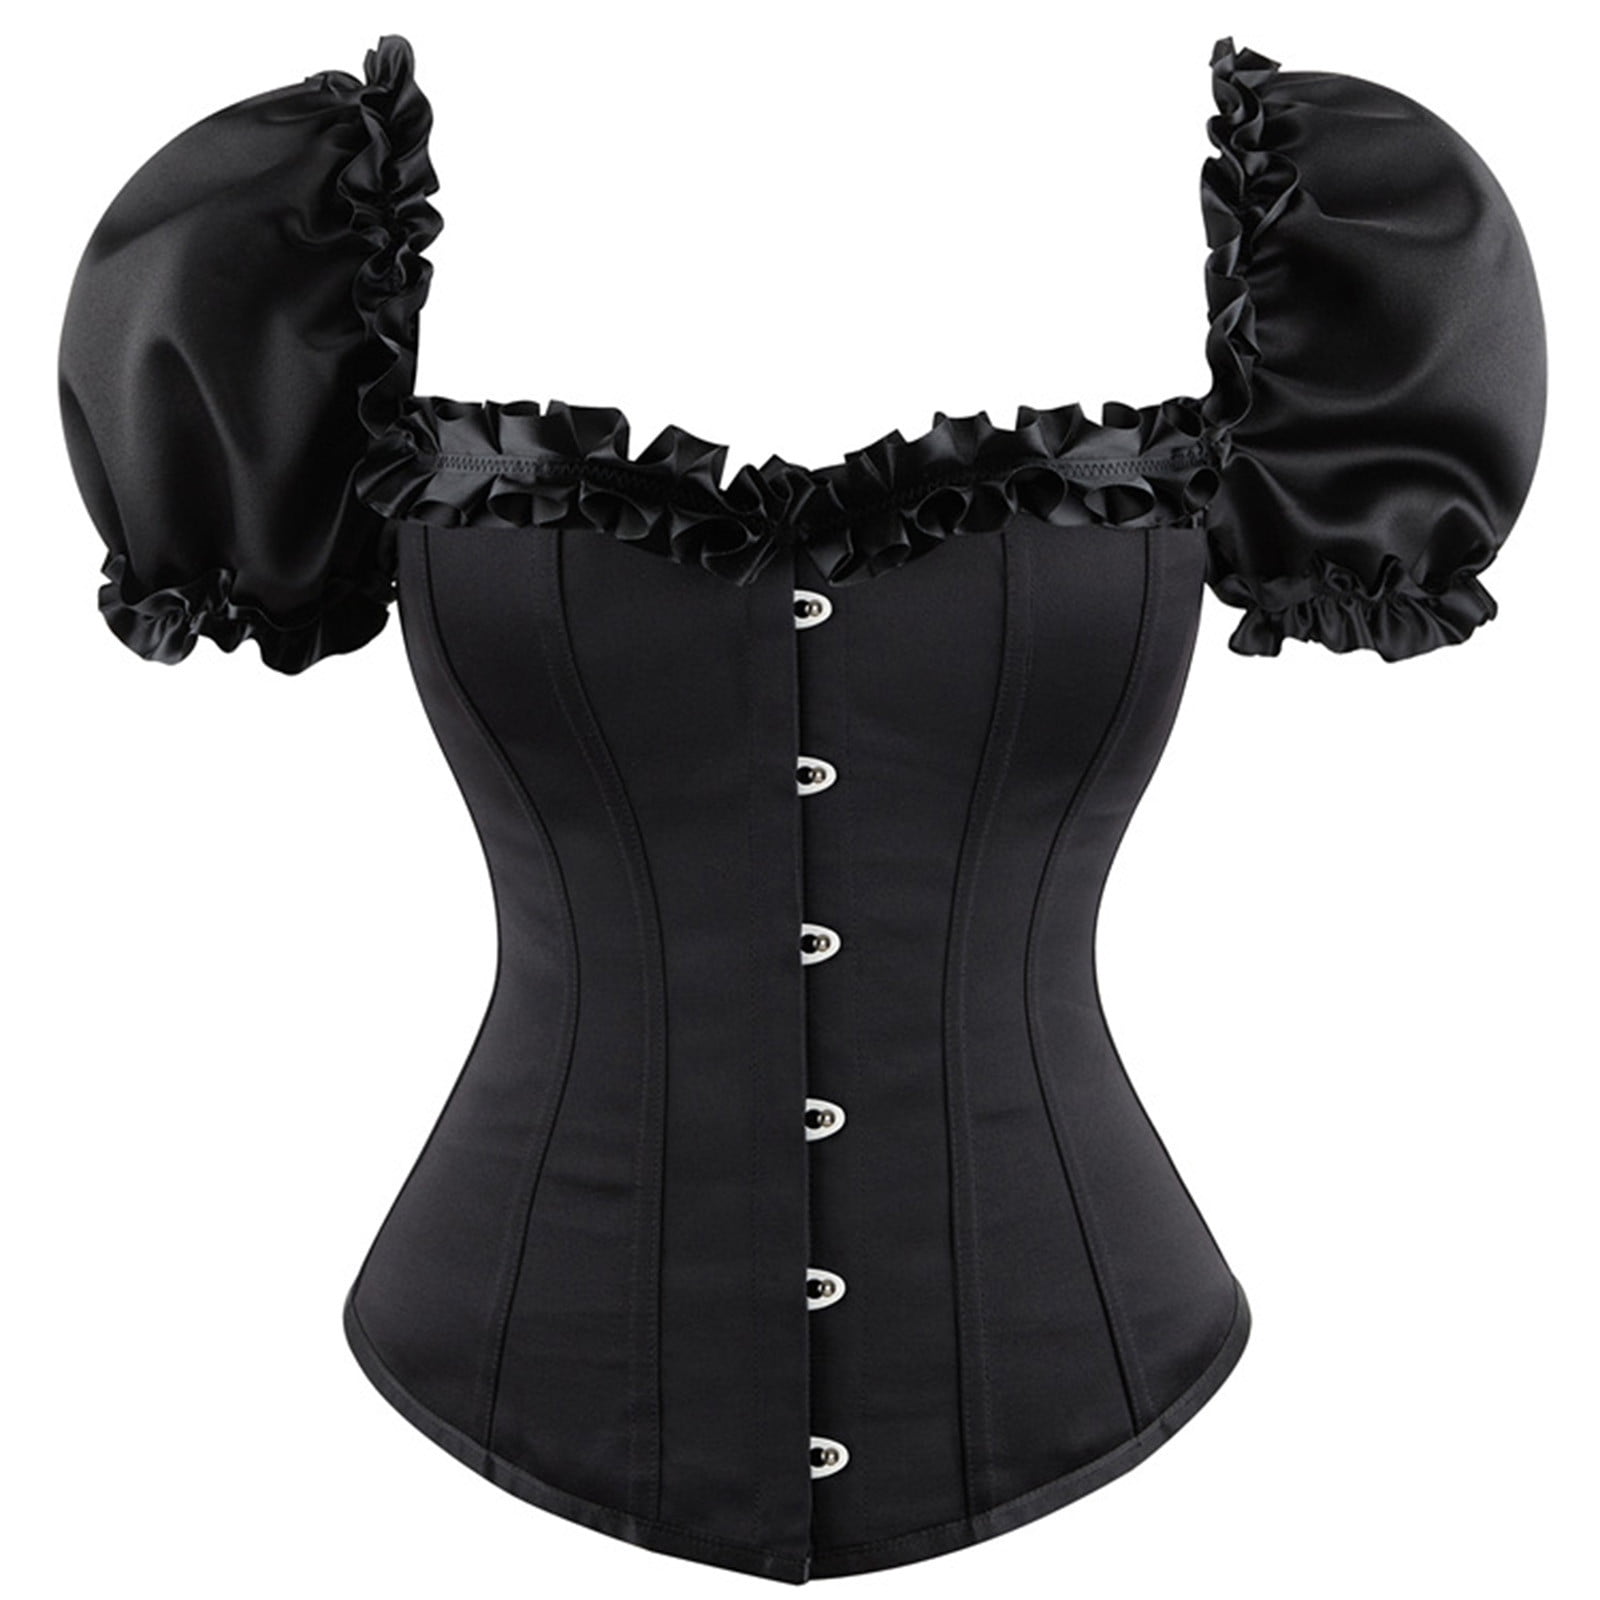 TLOOWY Sexy Corset Leather Lingerie for Women Gothic Bustiers